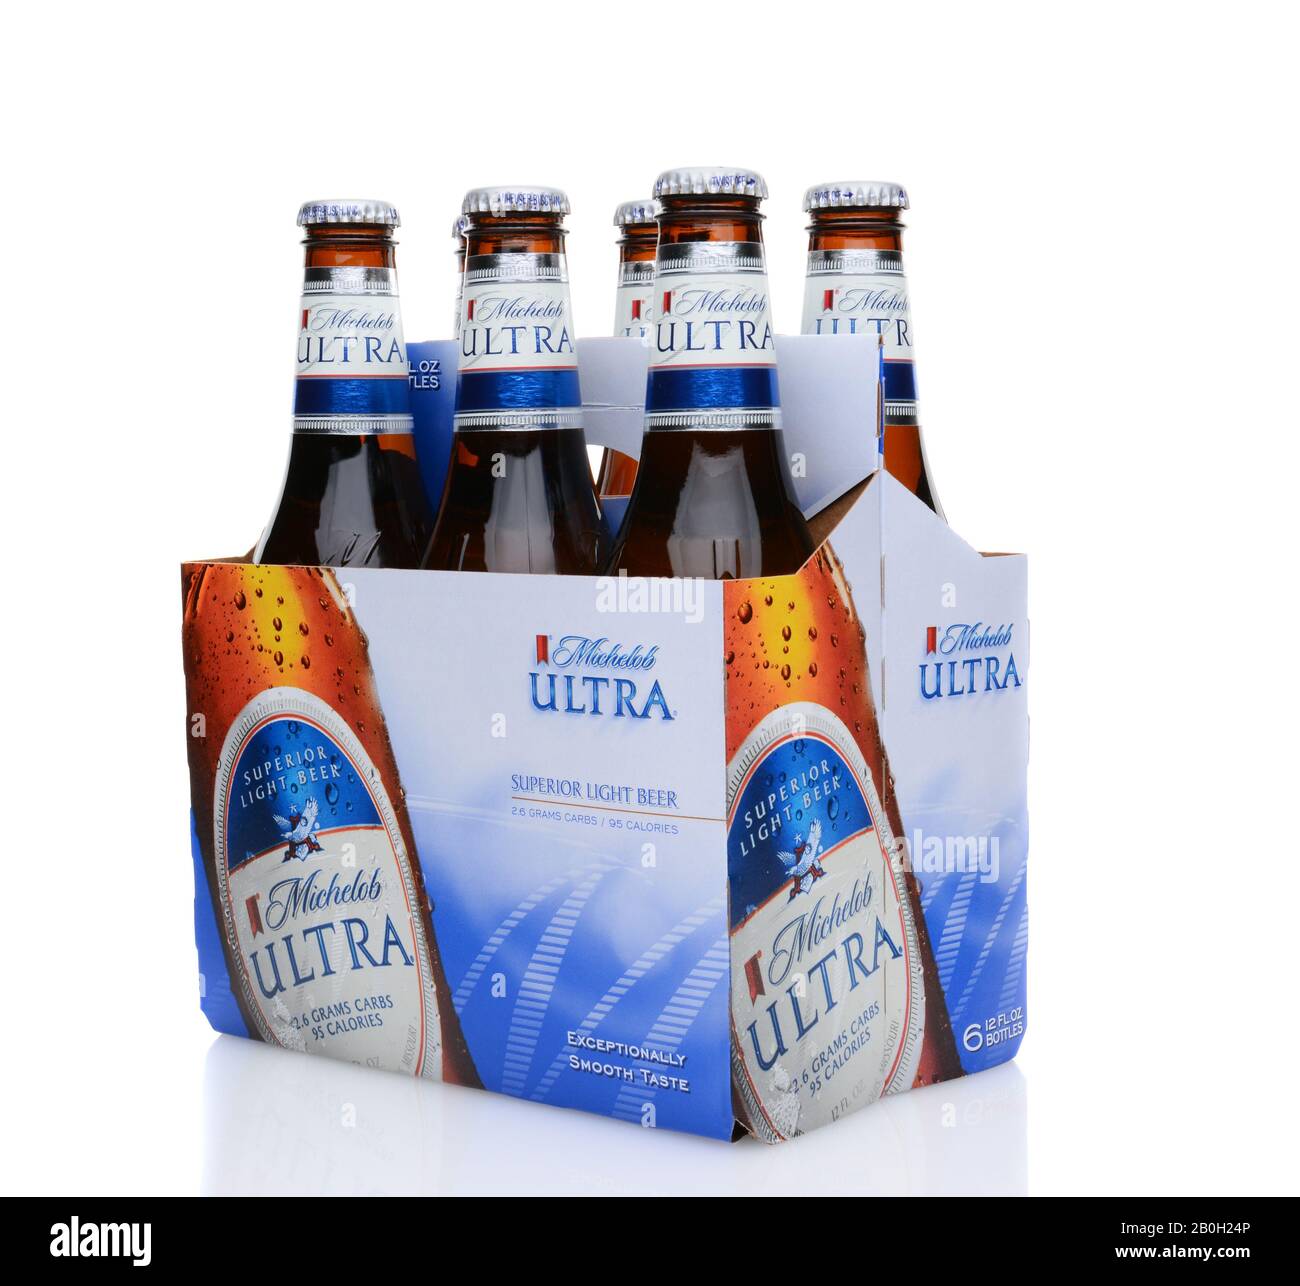 IRVINE, CA - MAY 25, 2014: A 6 pack of Michelob Ultra, 3/4 view. Introduced in 2002 Michelob Ultra is a light beer with reduced calories and carbohydr Stock Photo